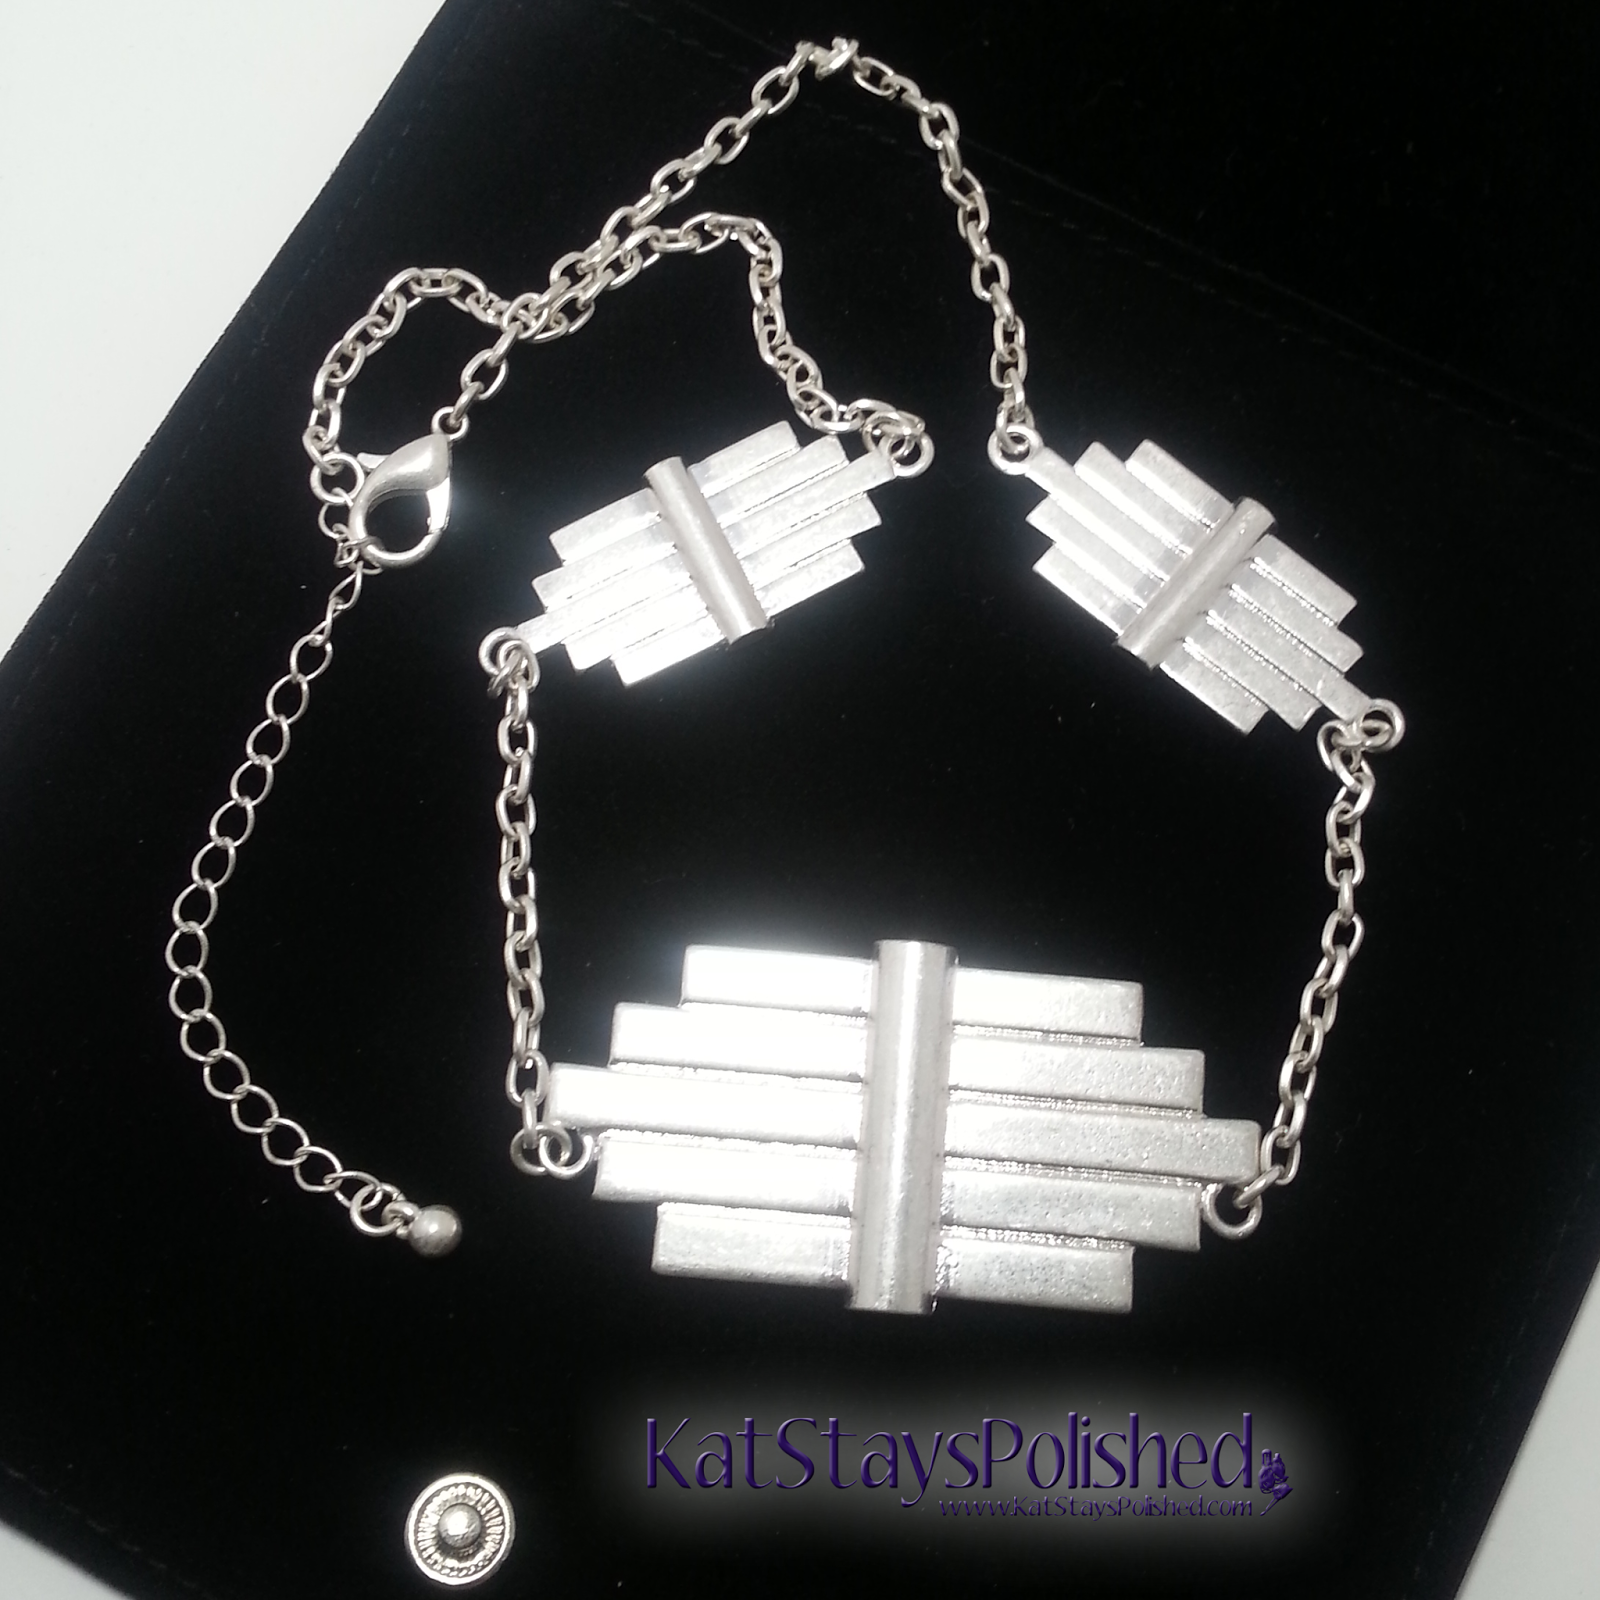 Wantable August 2014 Accessories - Shanny Necklace | Kat Stays Polished